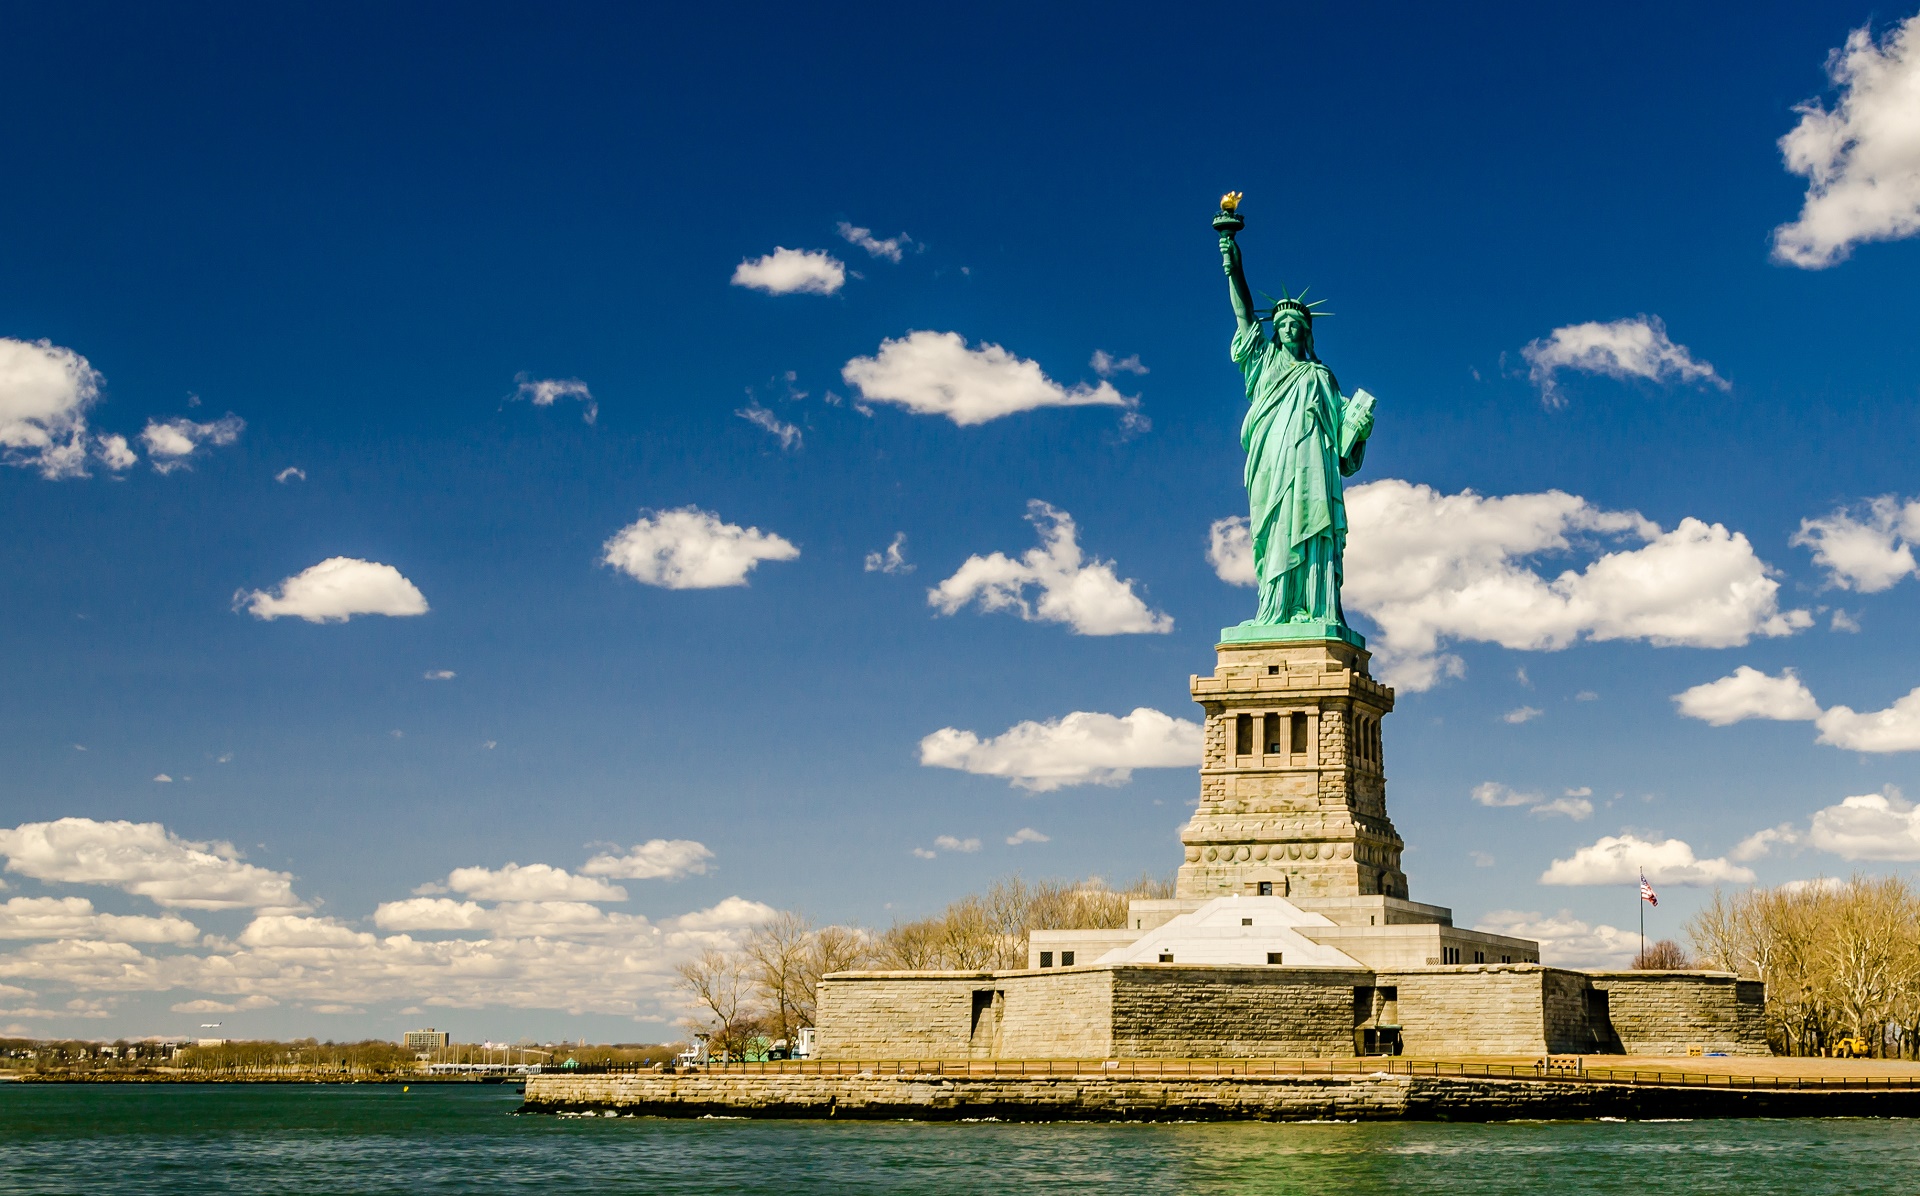 Statue Of Liberty Wallpapers Pictures Images HD Wallpapers Download Free Map Images Wallpaper [wallpaper376.blogspot.com]